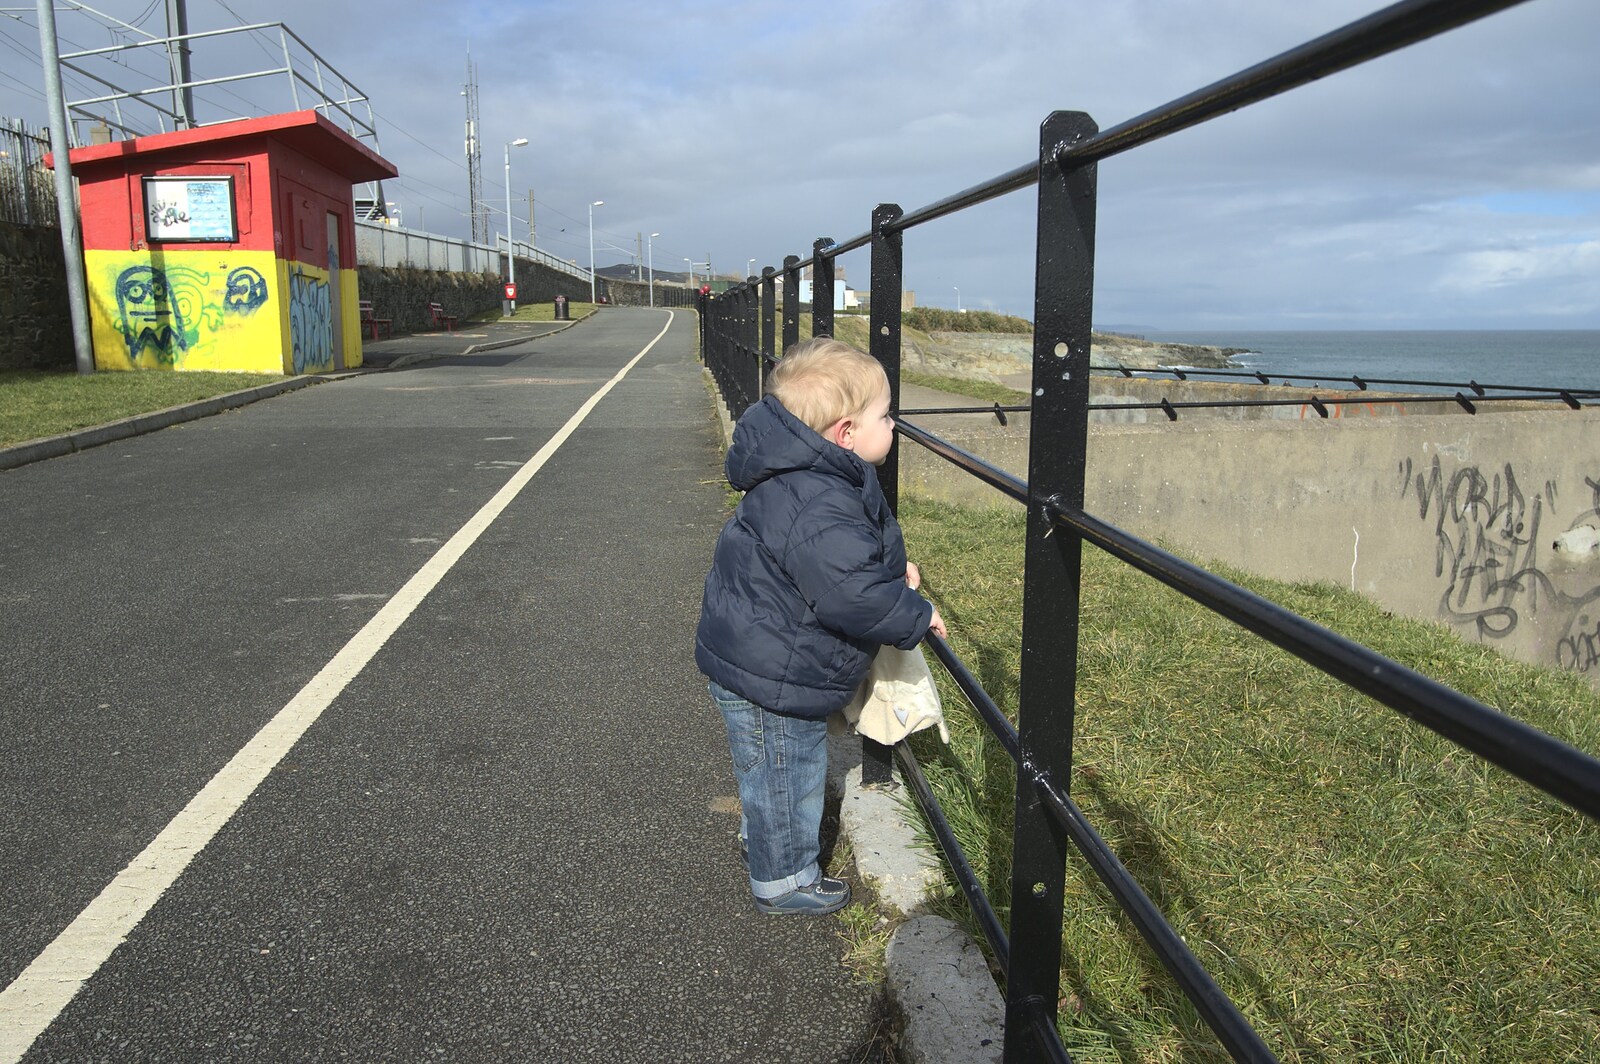 The Boy stares out to sea from A Day in Greystones, County Dublin, Ireland - 28th February 2010